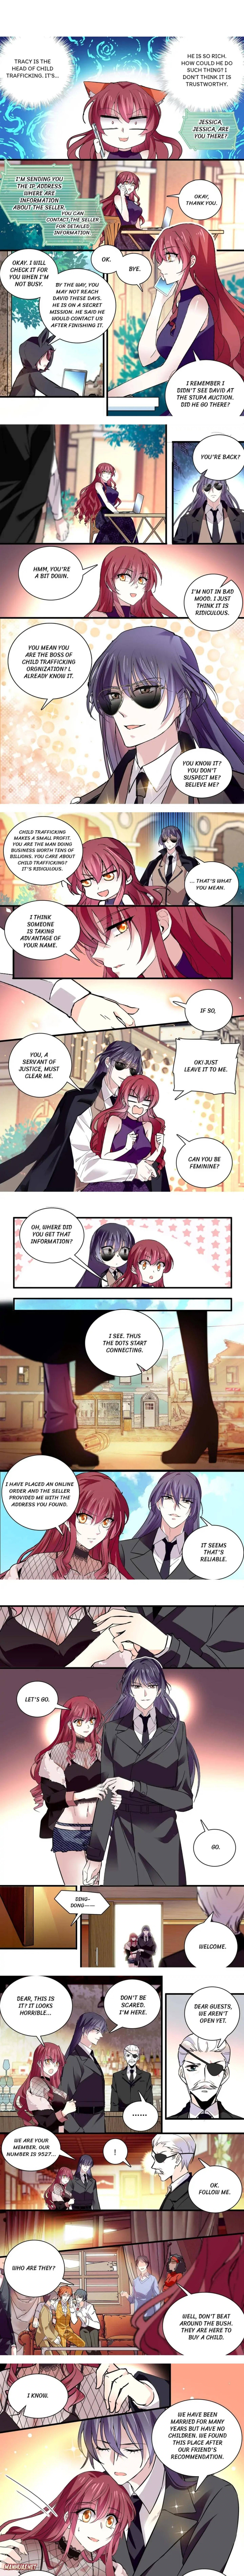 My Love Story - Page 1